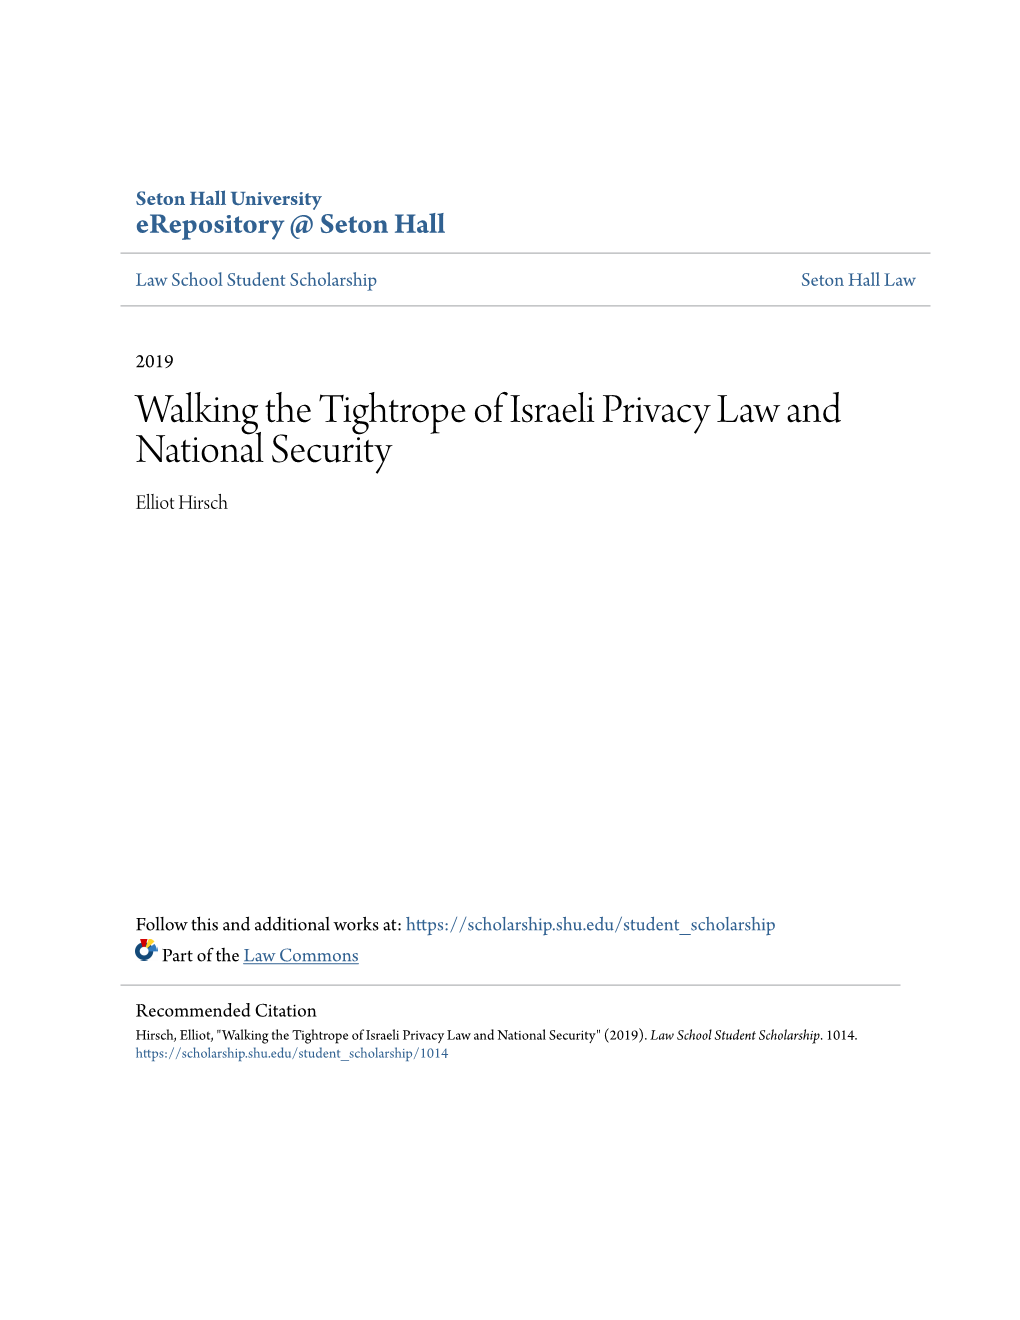 Walking the Tightrope of Israeli Privacy Law and National Security Elliot Hirsch